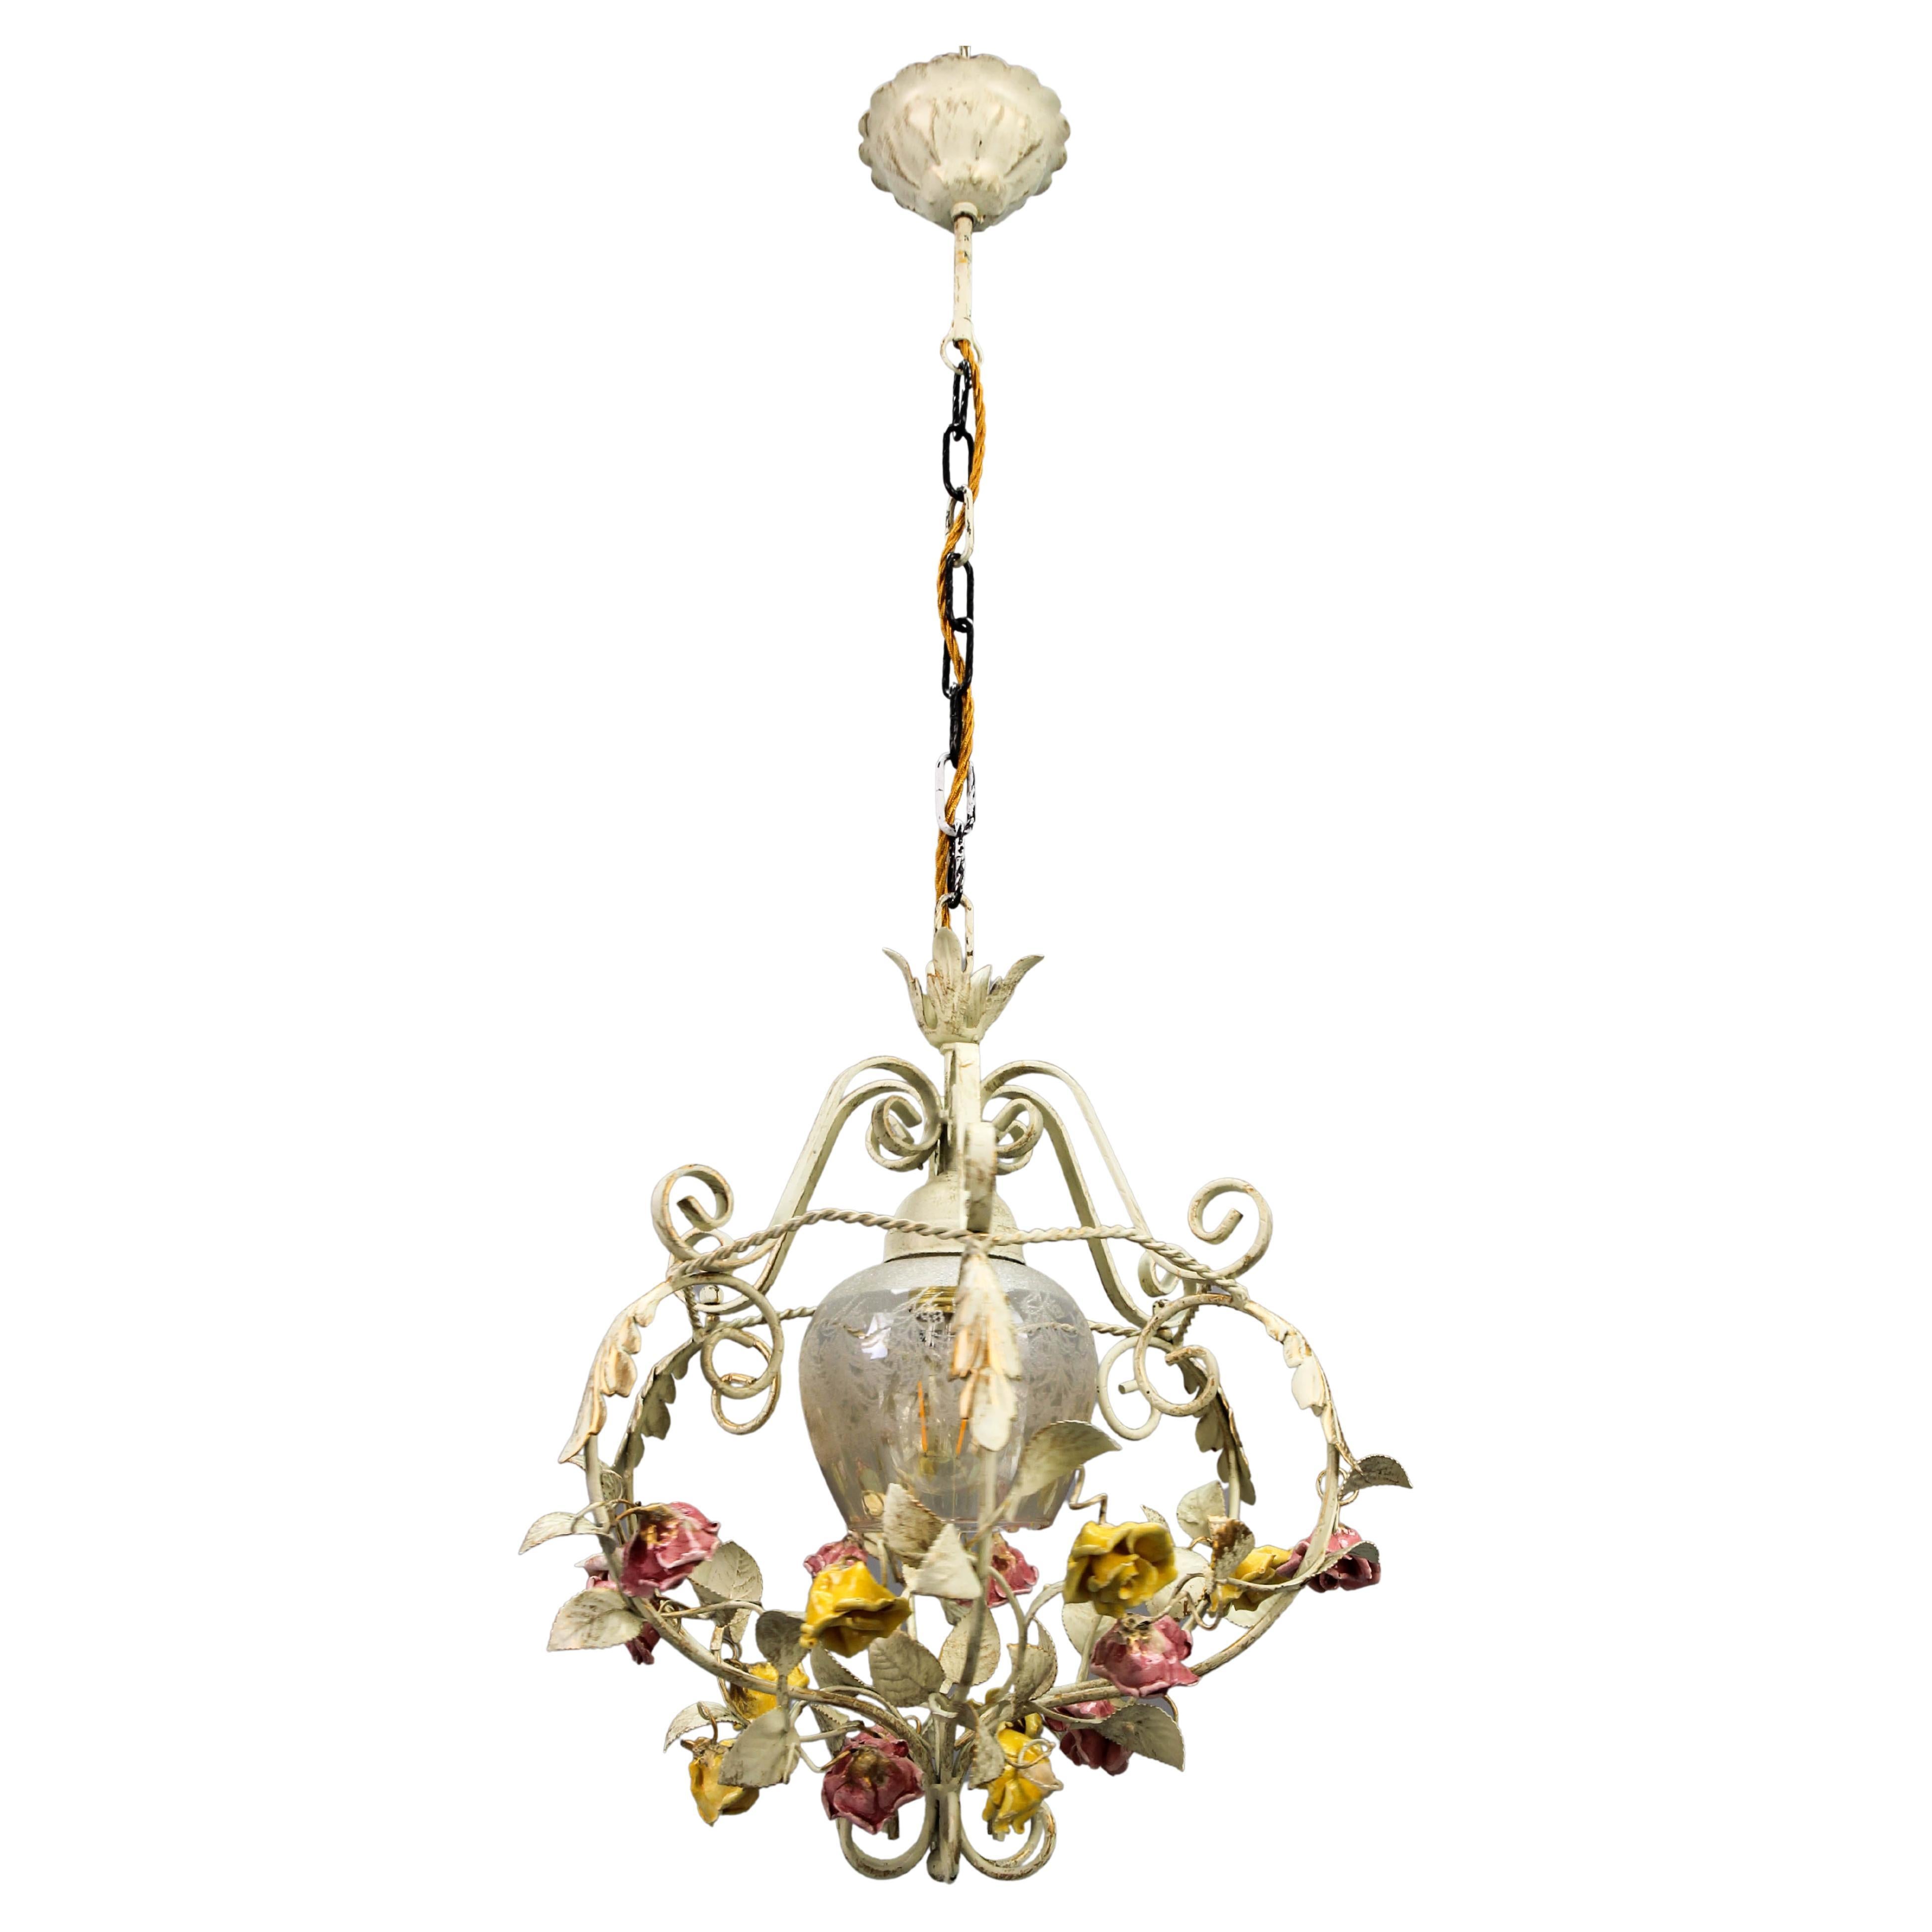 Hollywood Regency Style Metal and Glass Chandelier with Porcelain Roses, 1970s For Sale